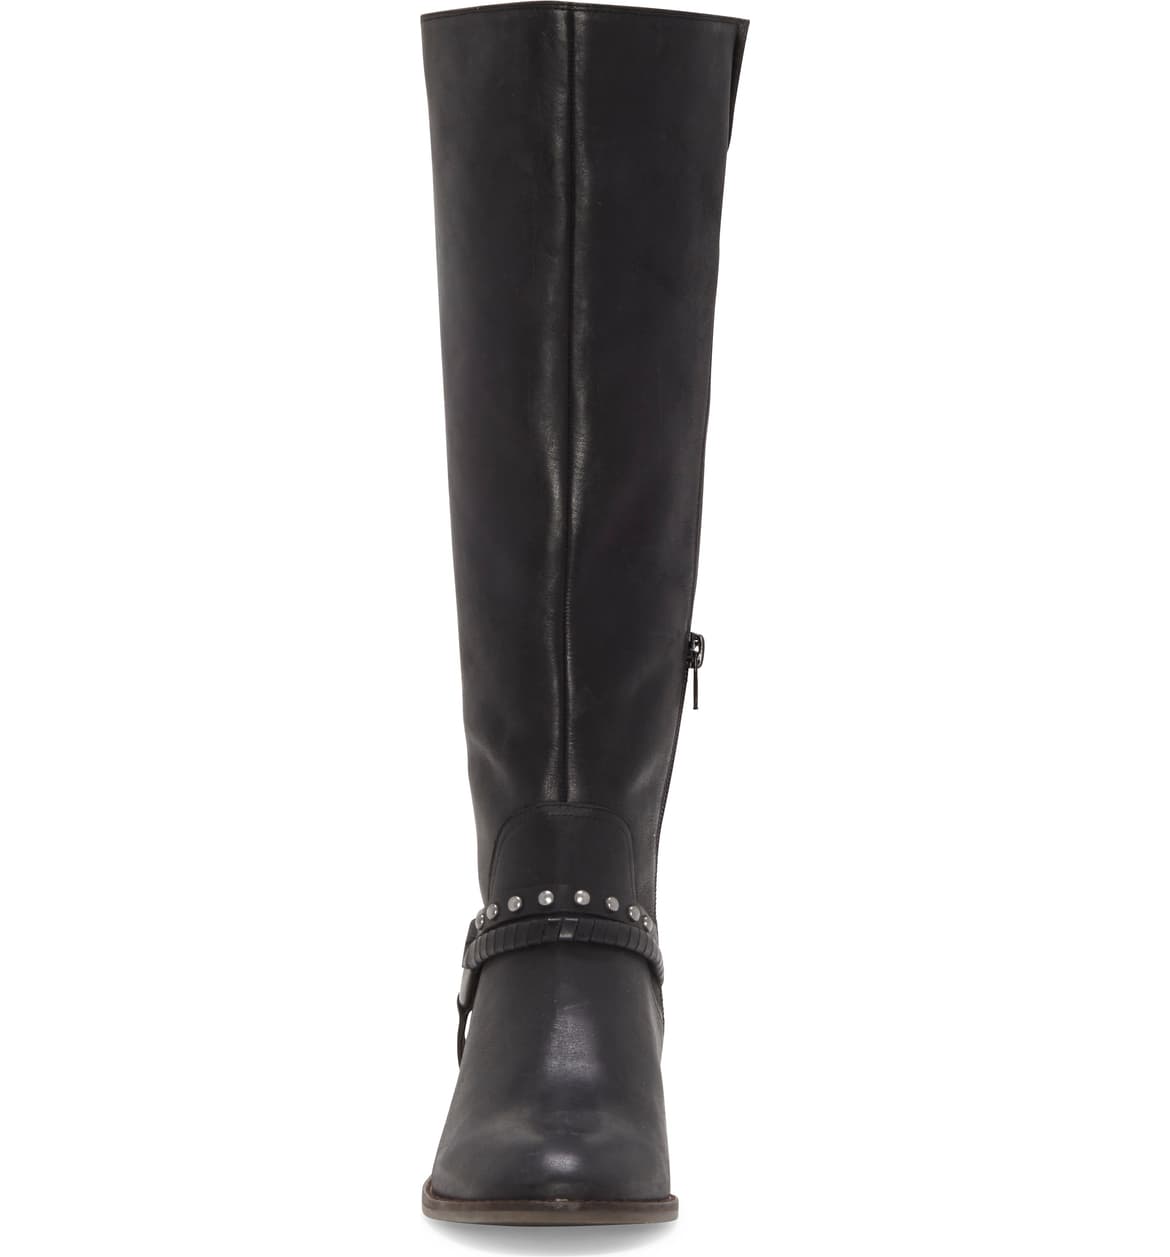 Lucky Brand KARESI Equestrian Boot Black Soft Leather Knee High Riding ...